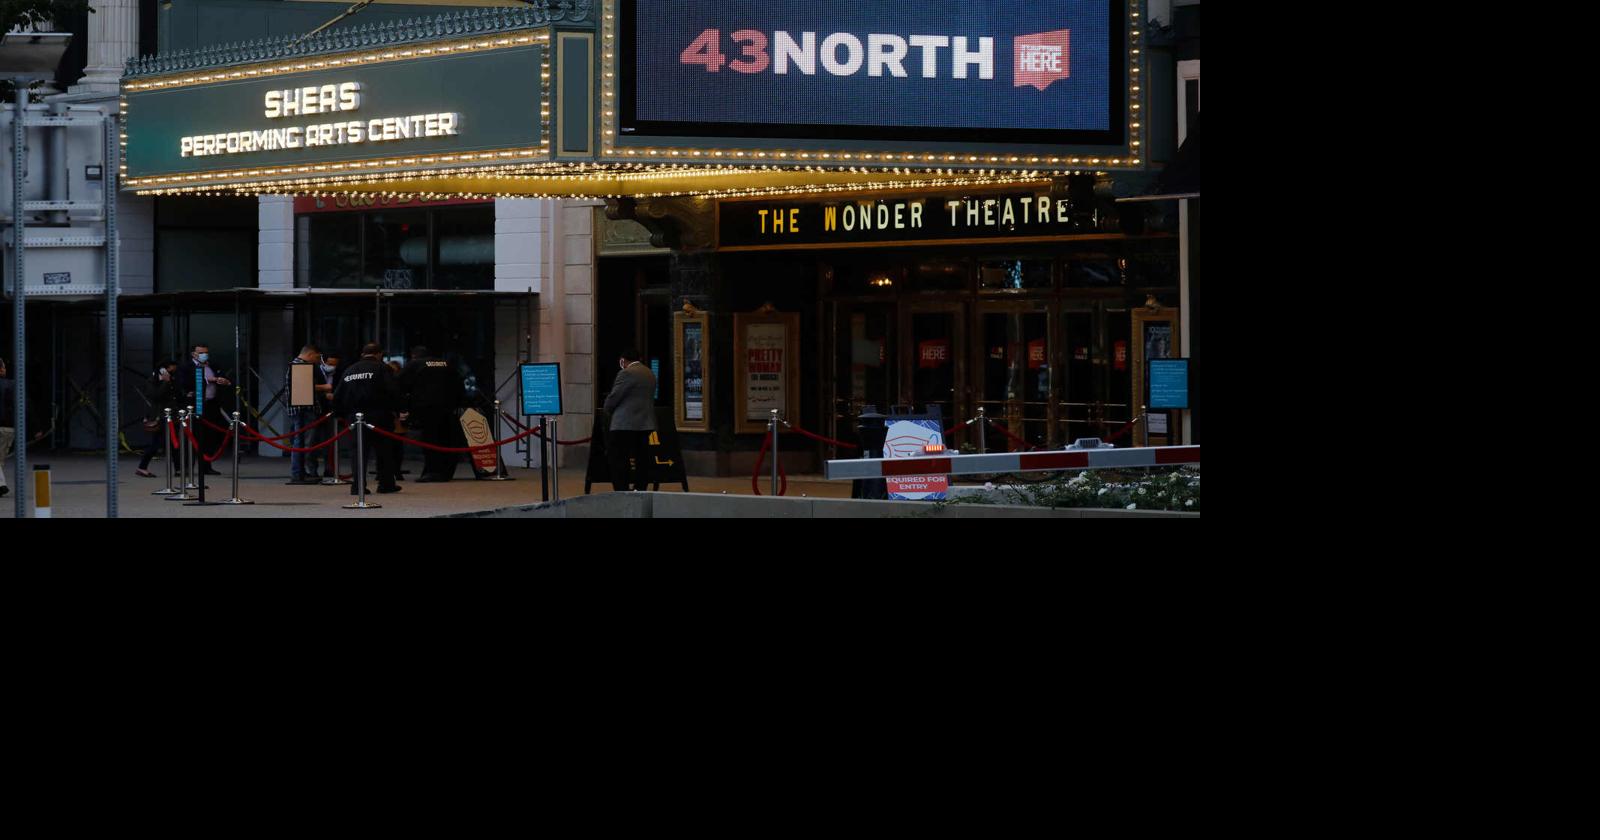 It's showtime for 43North: 15 finalists vie for five $1 million prizes